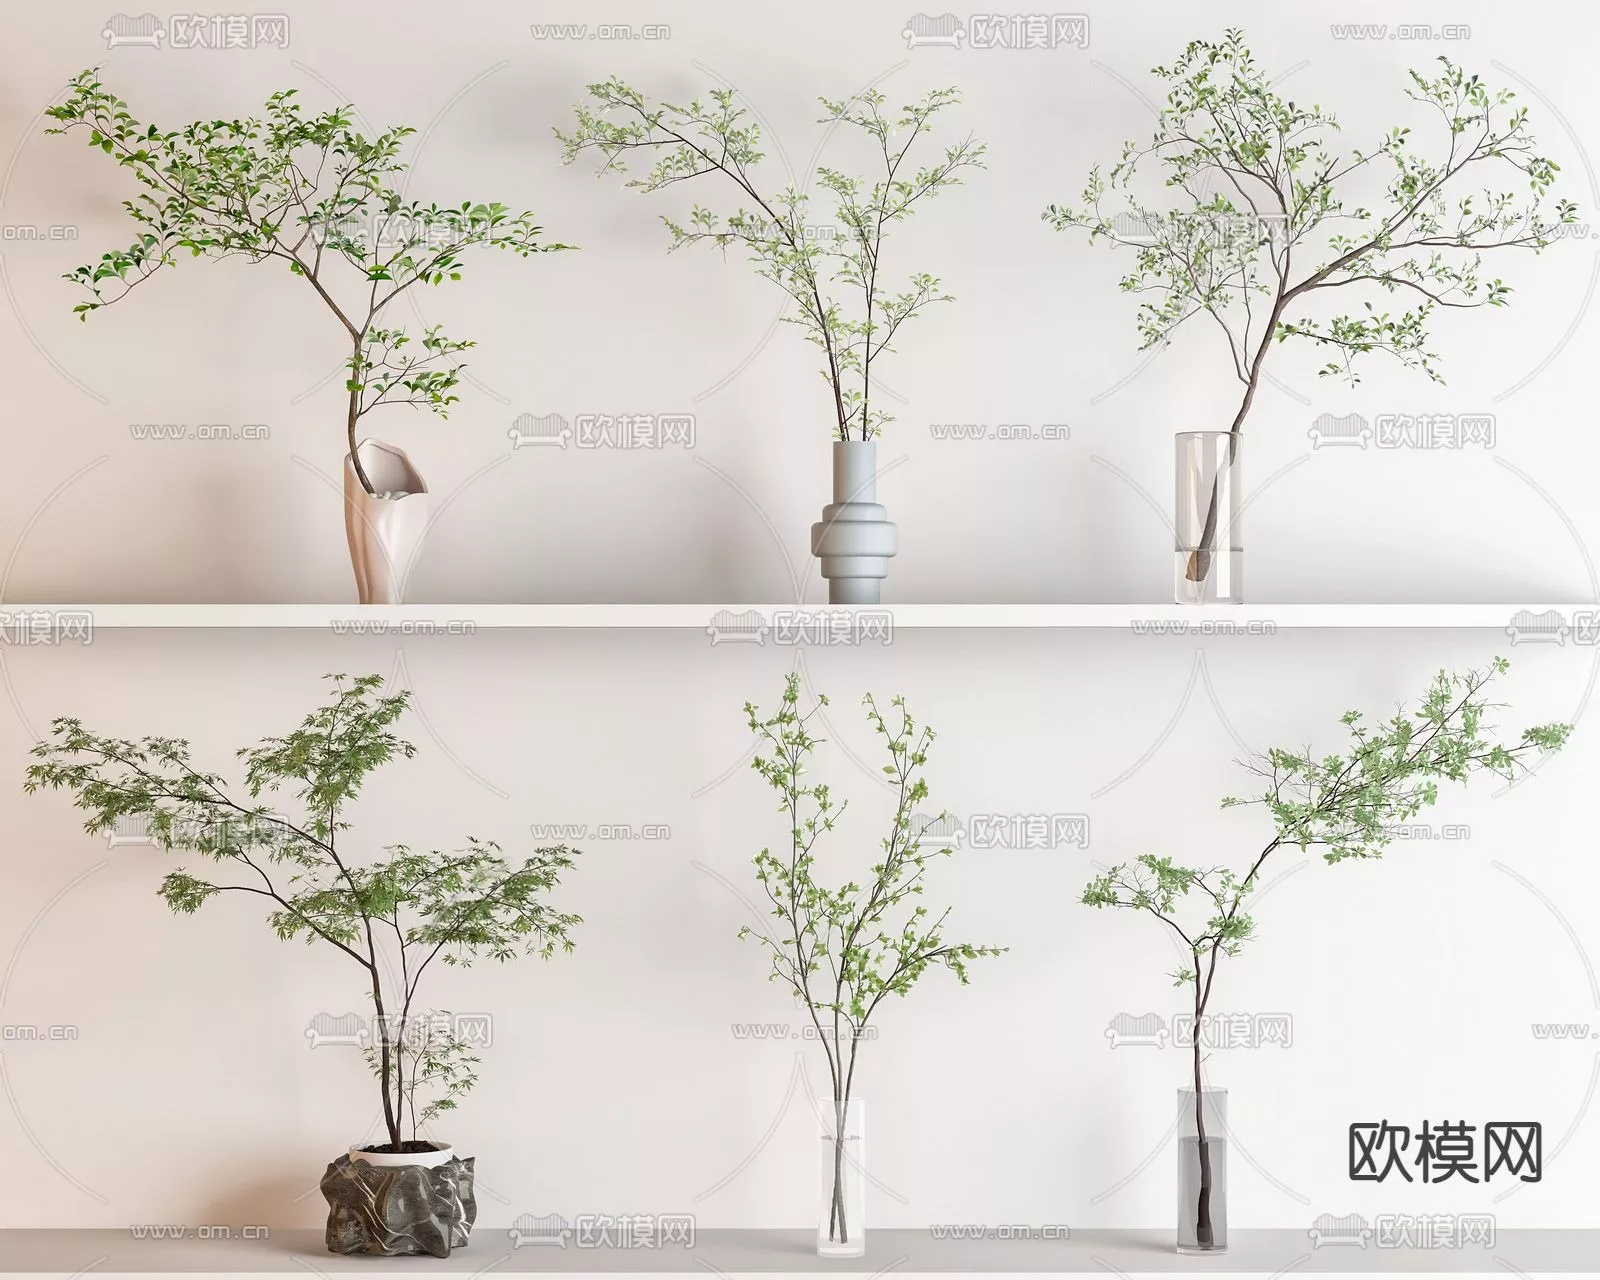 MODERN TREE - SKETCHUP 3D MODEL - VRAY OR ENSCAPE - ID15410